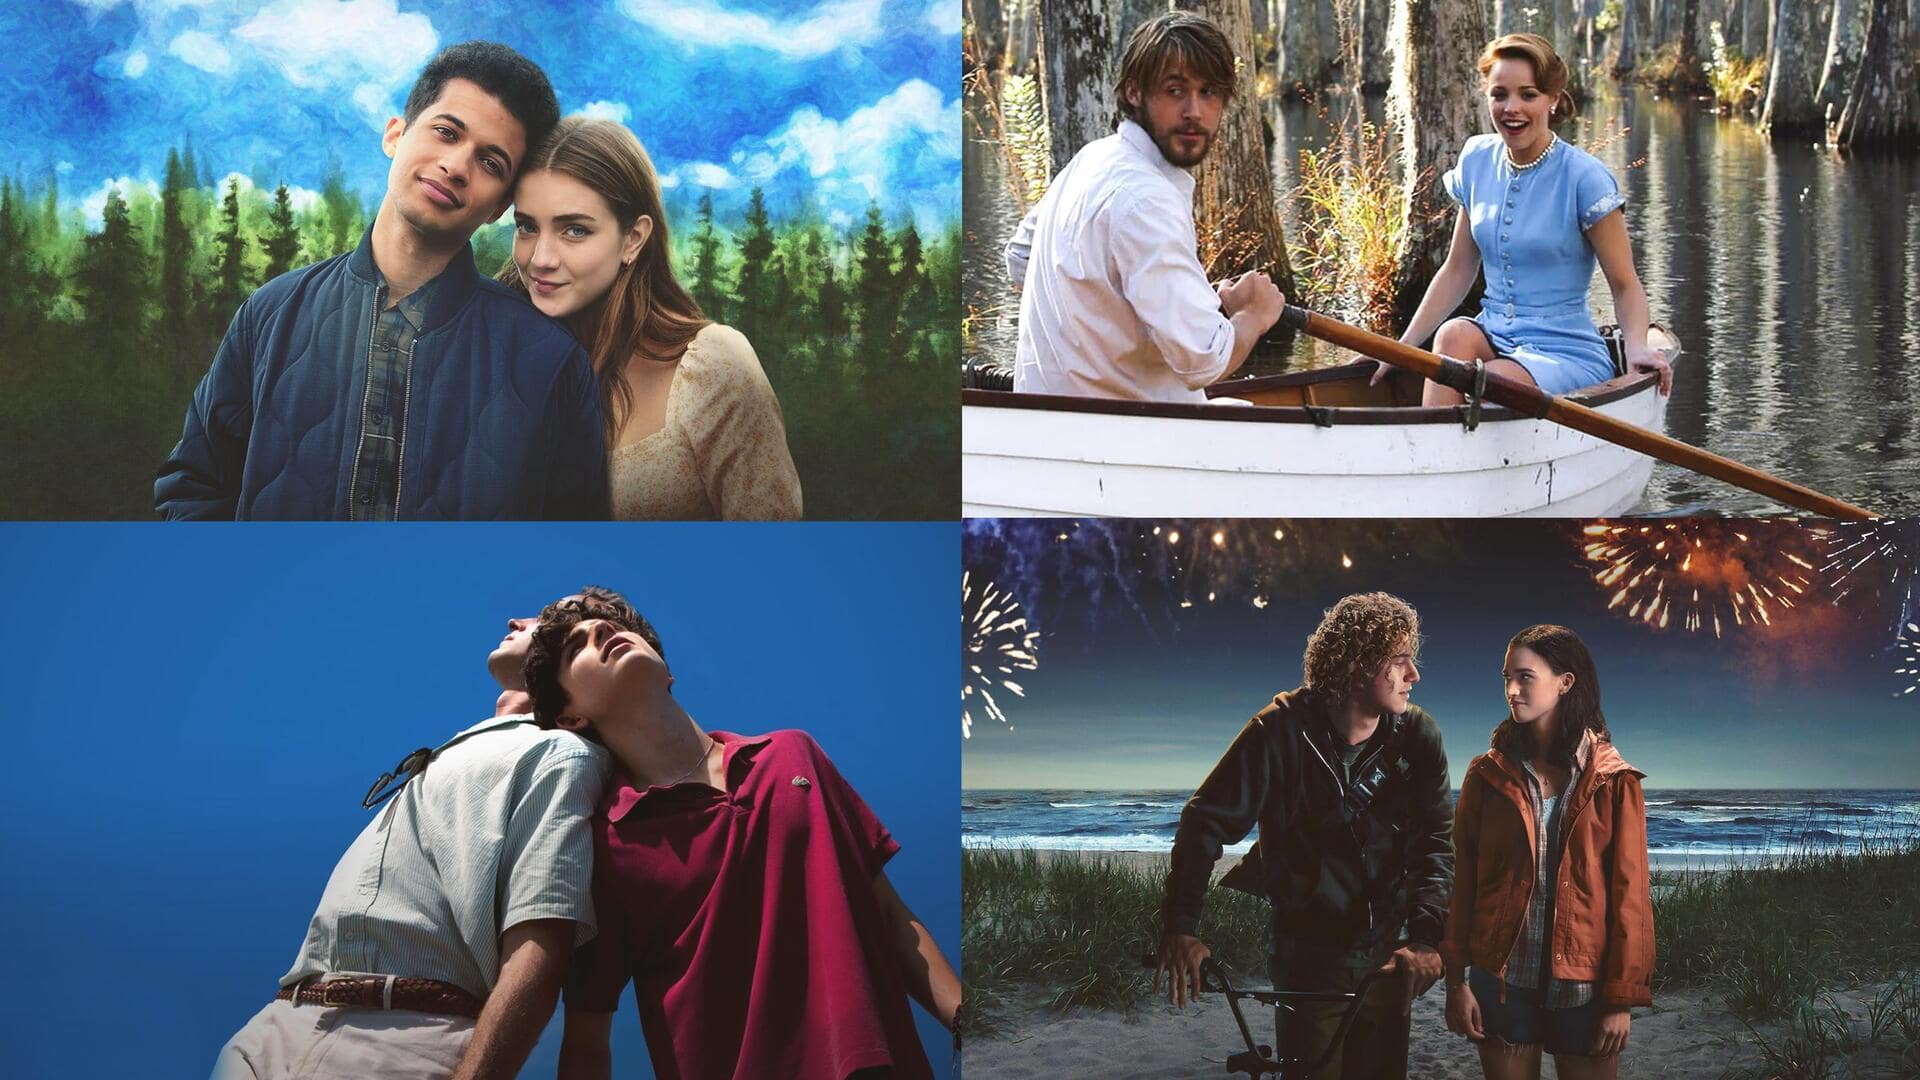 Hollywood movies that captured the essence of sweet summer love